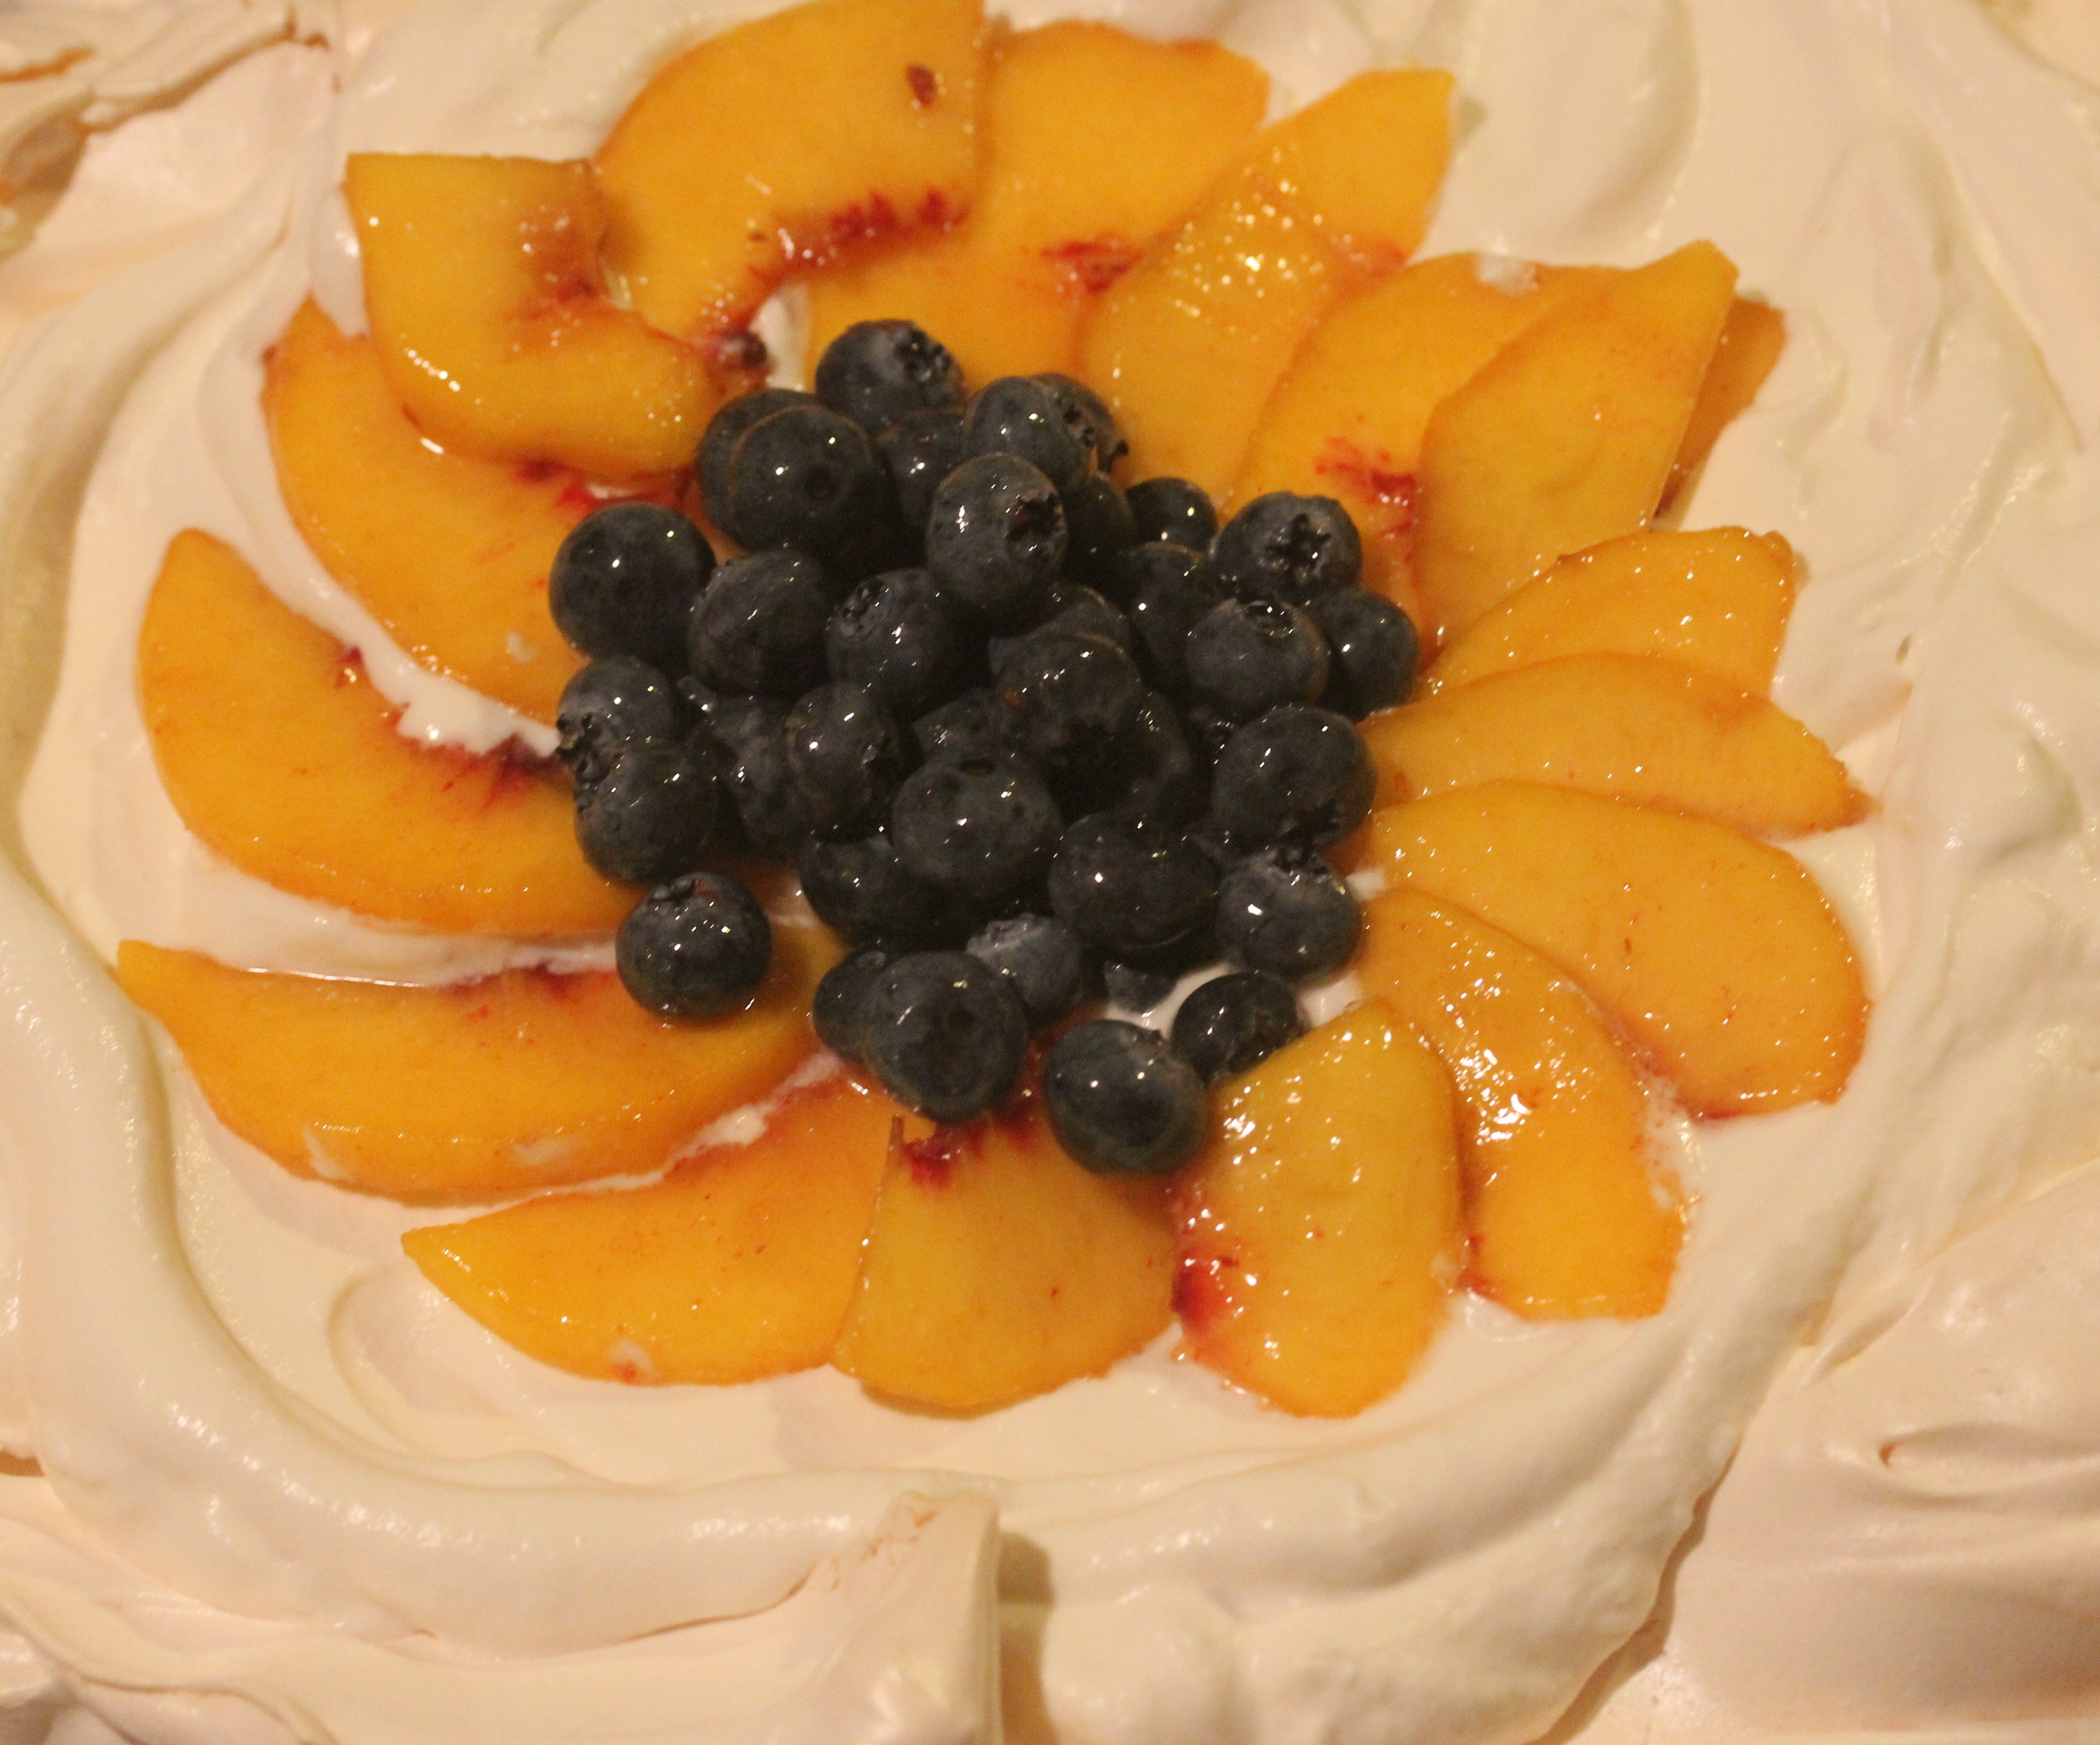 Classic Fruit Pavlova with Blueberries and Peaches or Whatever